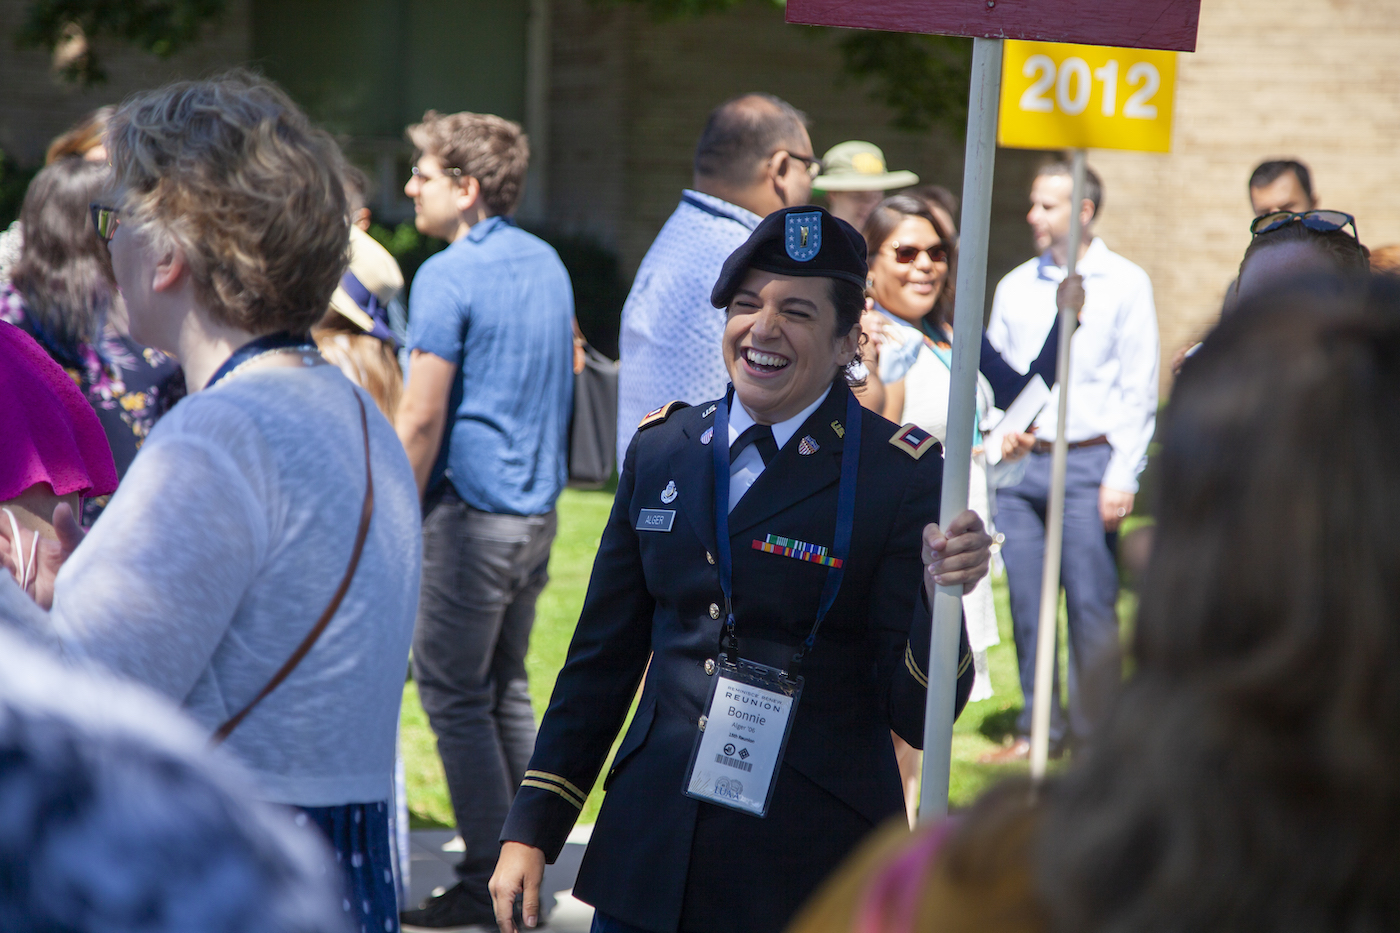 Bonnie Alger '06 is in uniform as she takes part in the Parade of Classes during Reunion weekend last June.